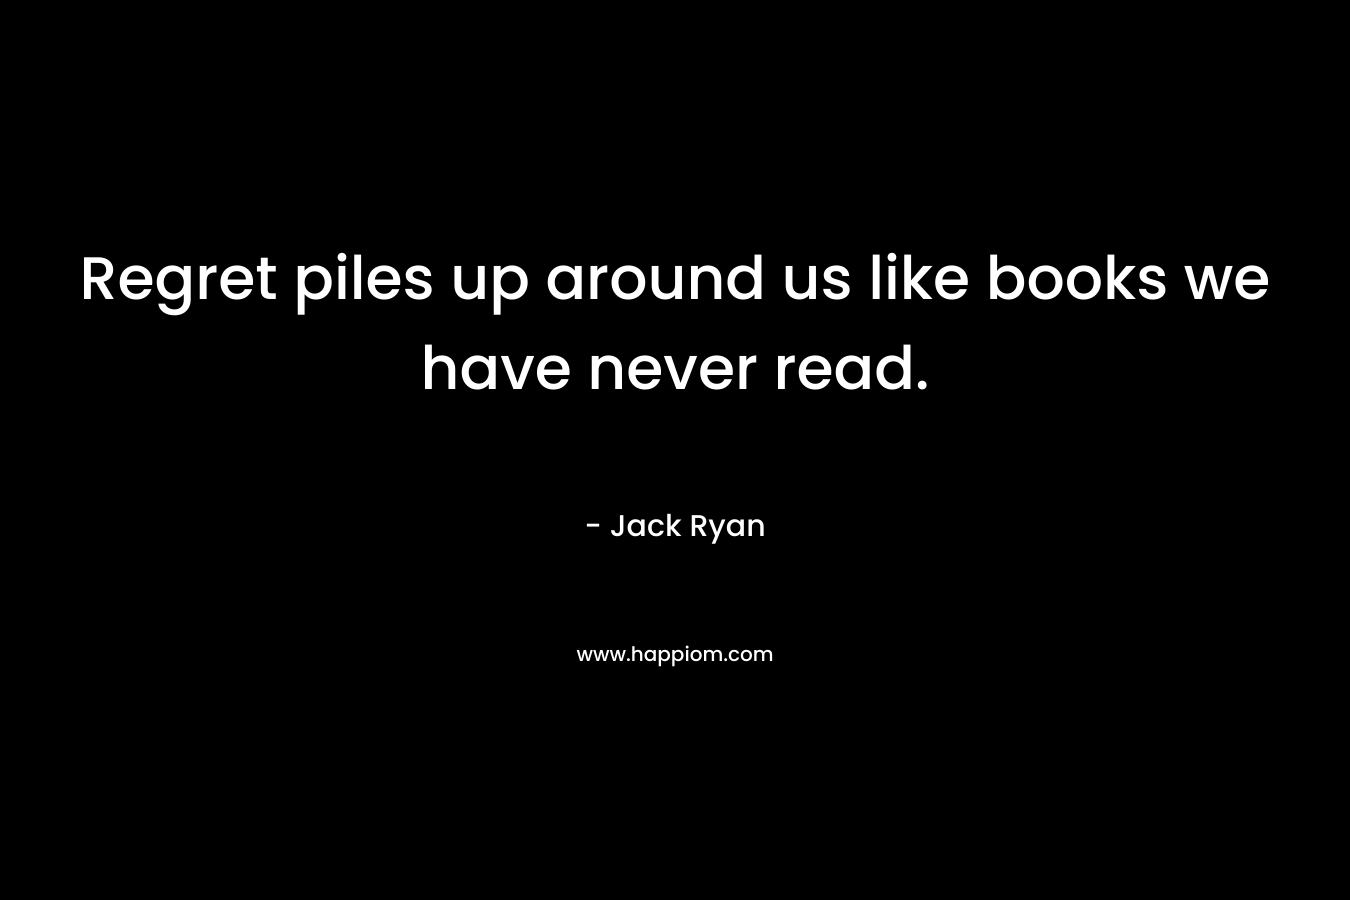 Regret piles up around us like books we have never read. – Jack Ryan